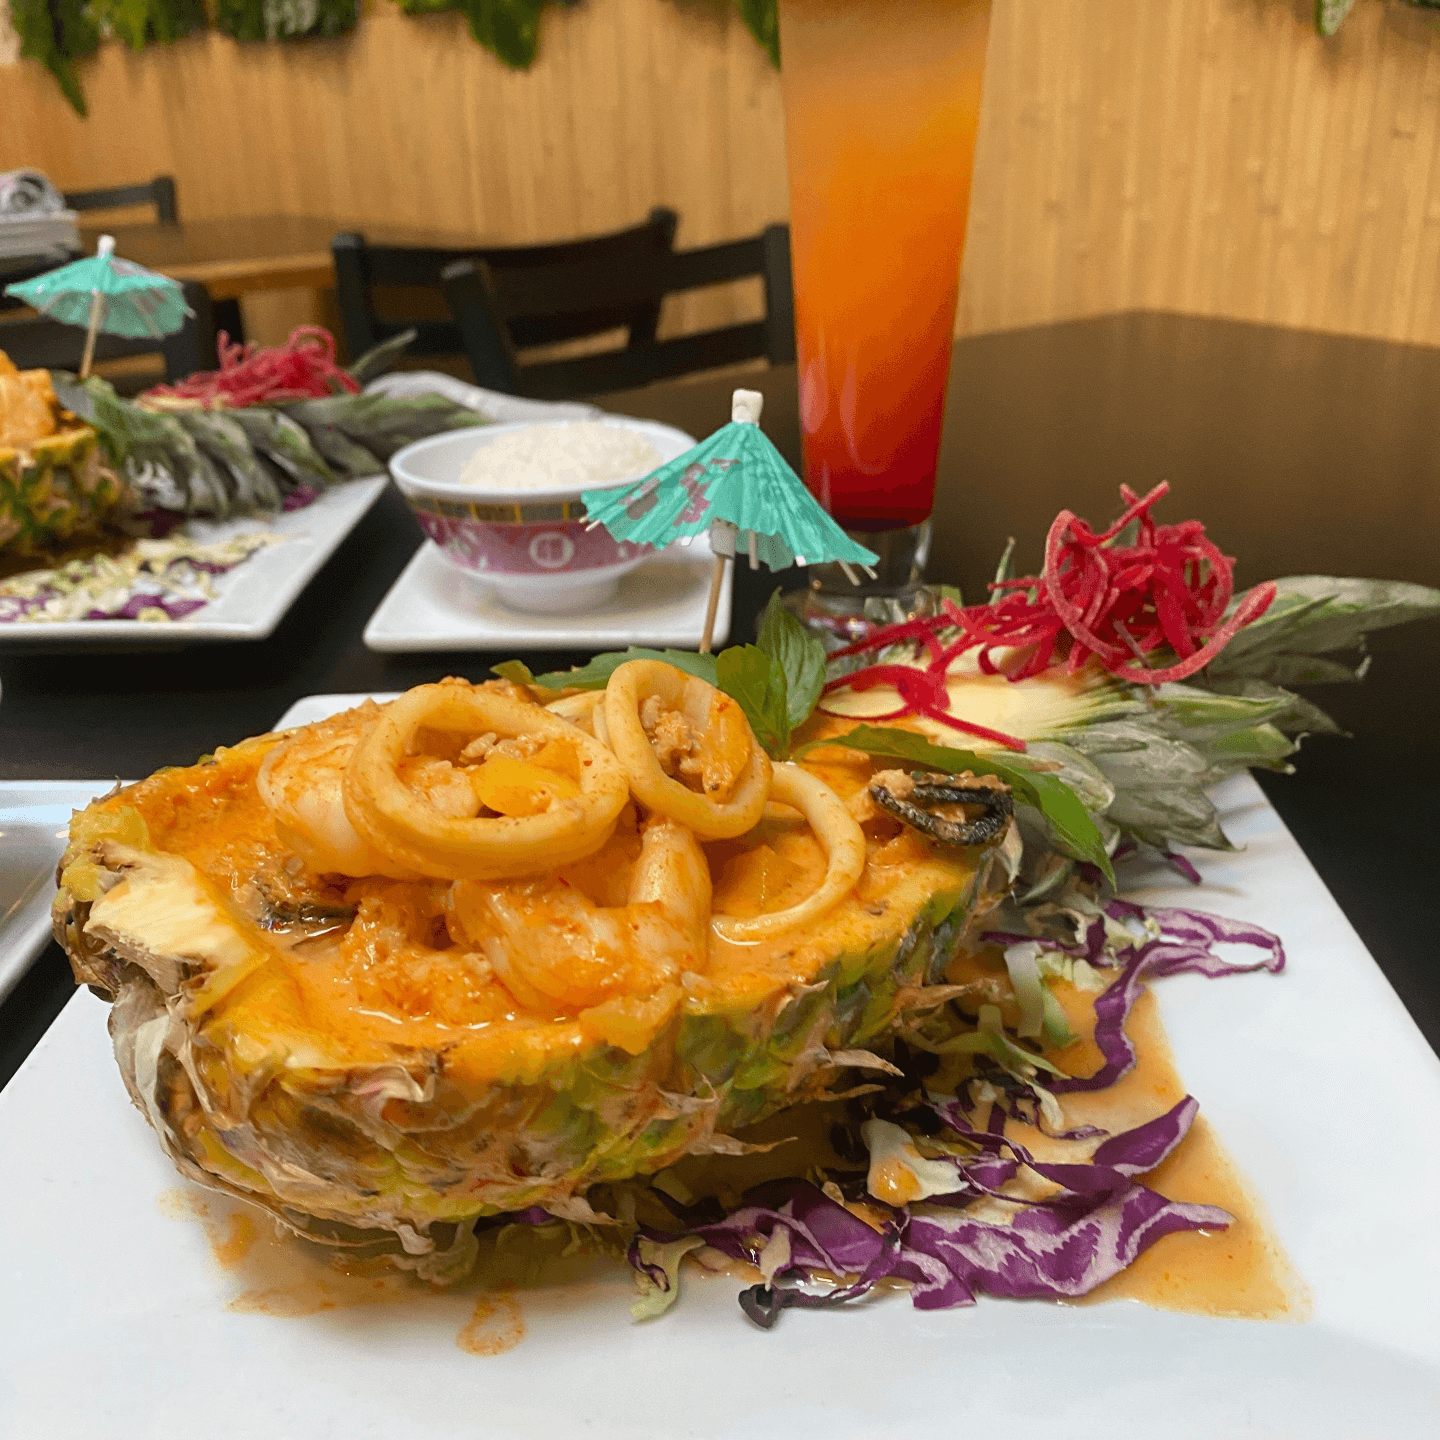 MALEE'S WEDNESDAY SPECIAL - TROPICAL PINEAPPLE 